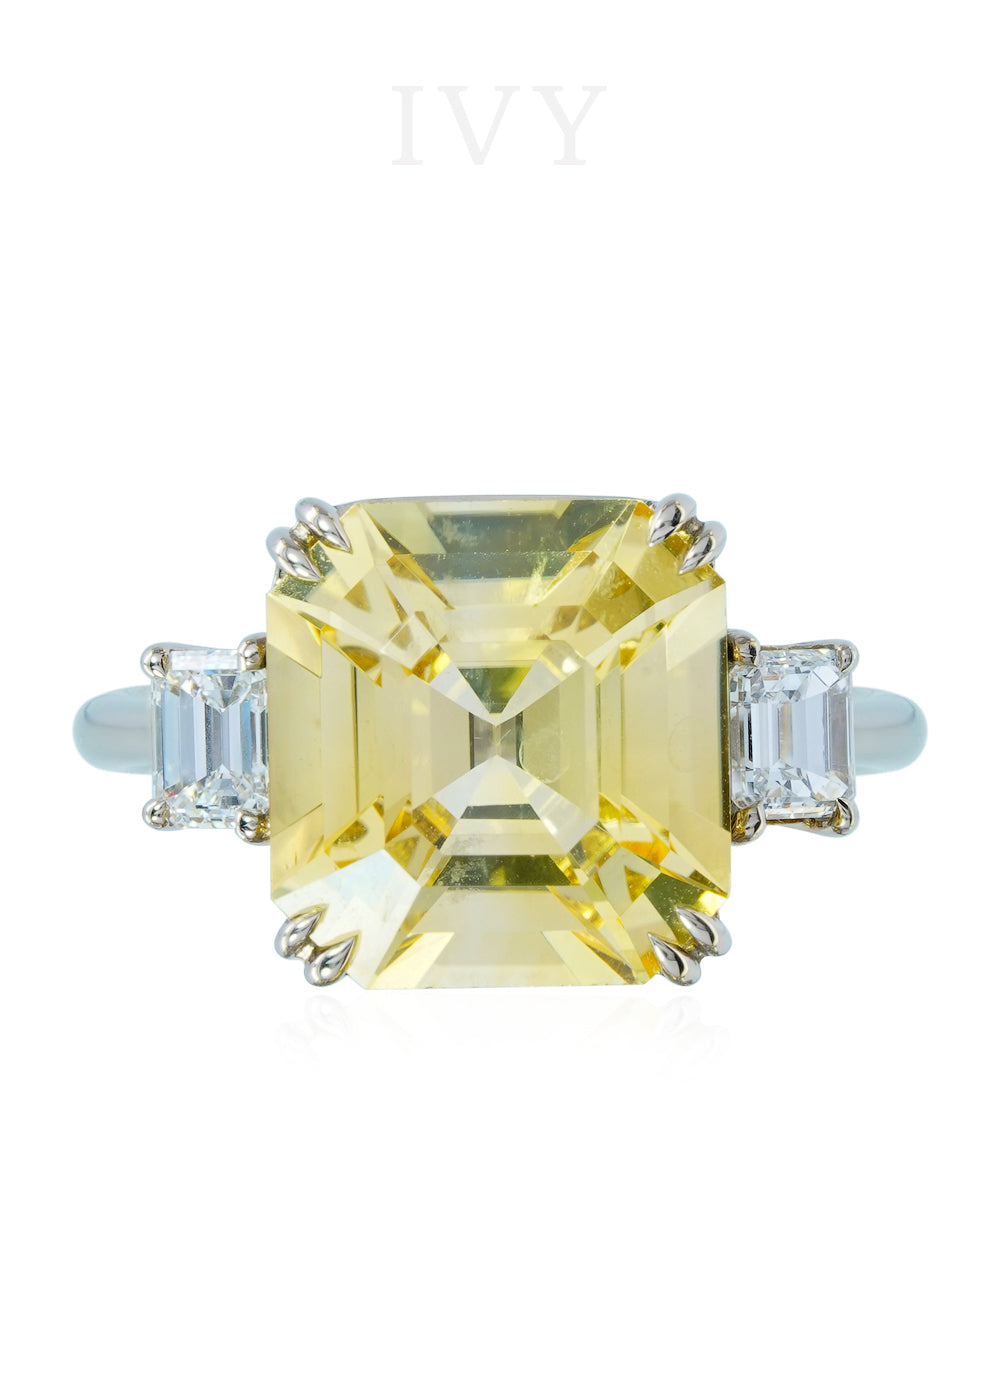 Princess Cut Yellow Sapphire and Three Row Diamond Ring in 14k White  Gold(GR-5901)